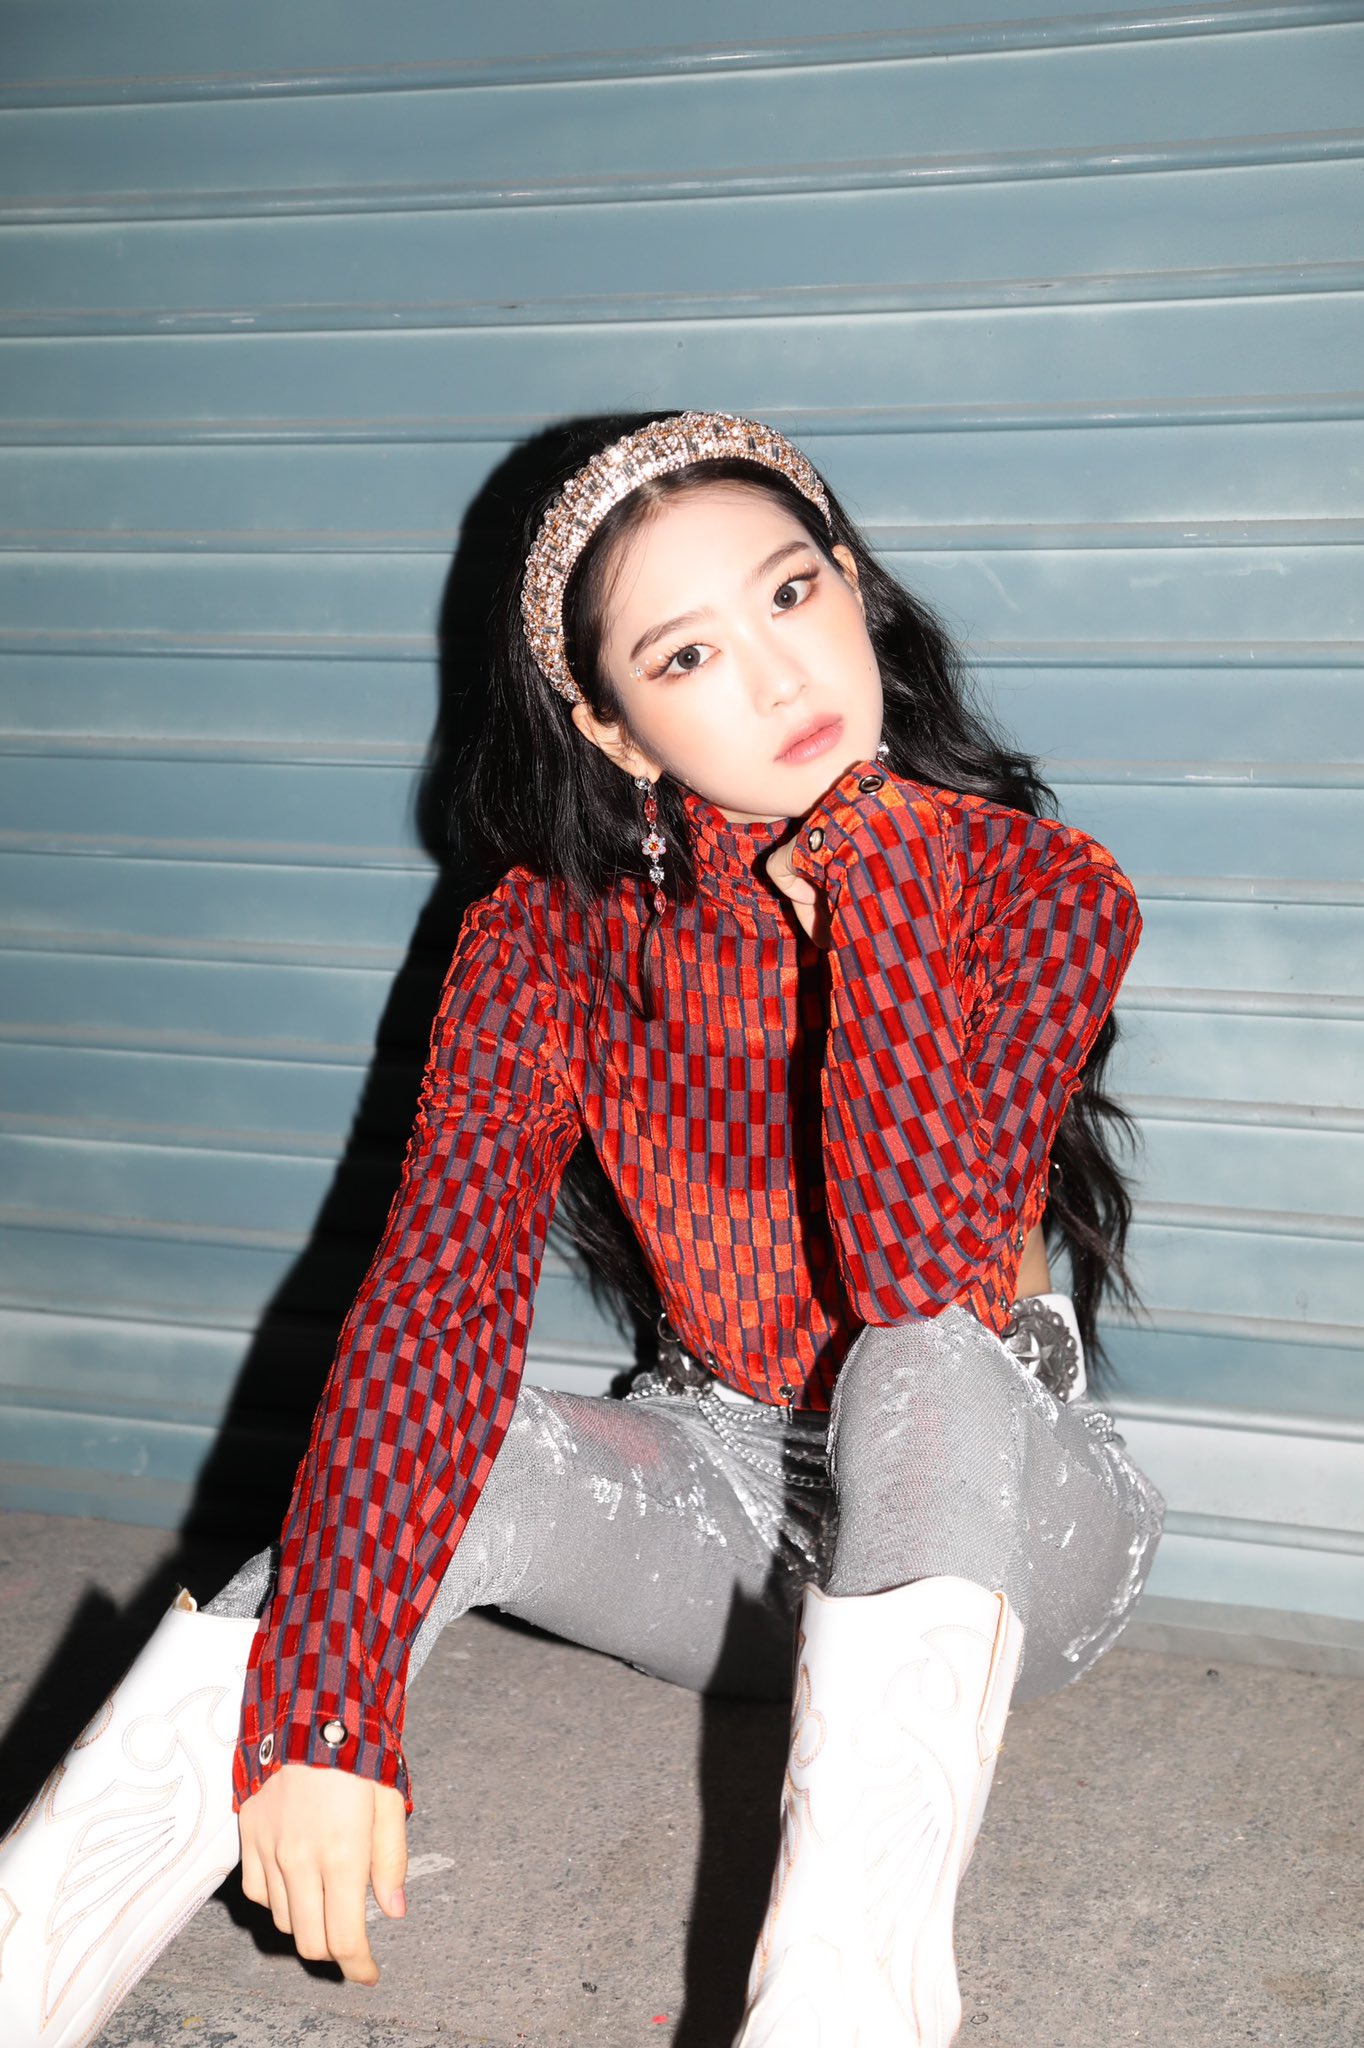 Jiho (Oh My Girl Member) Bio, Wiki, Age, Facts & More